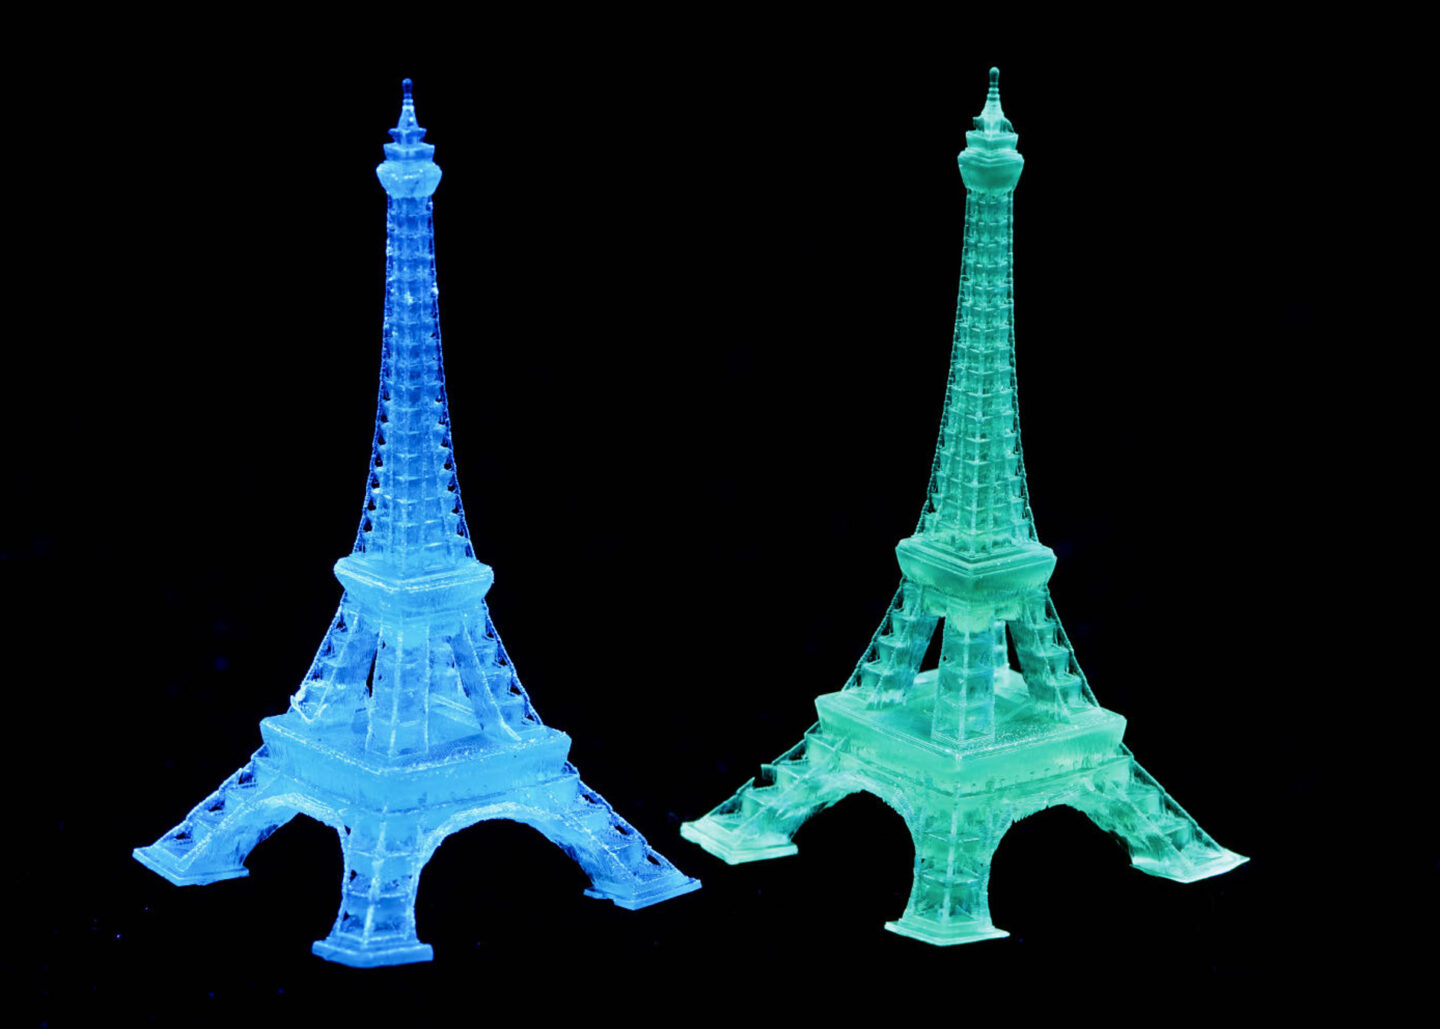 Blue and green Eiffel Tower-shaped luminescent structures 3D-printed from supramolecular ink.